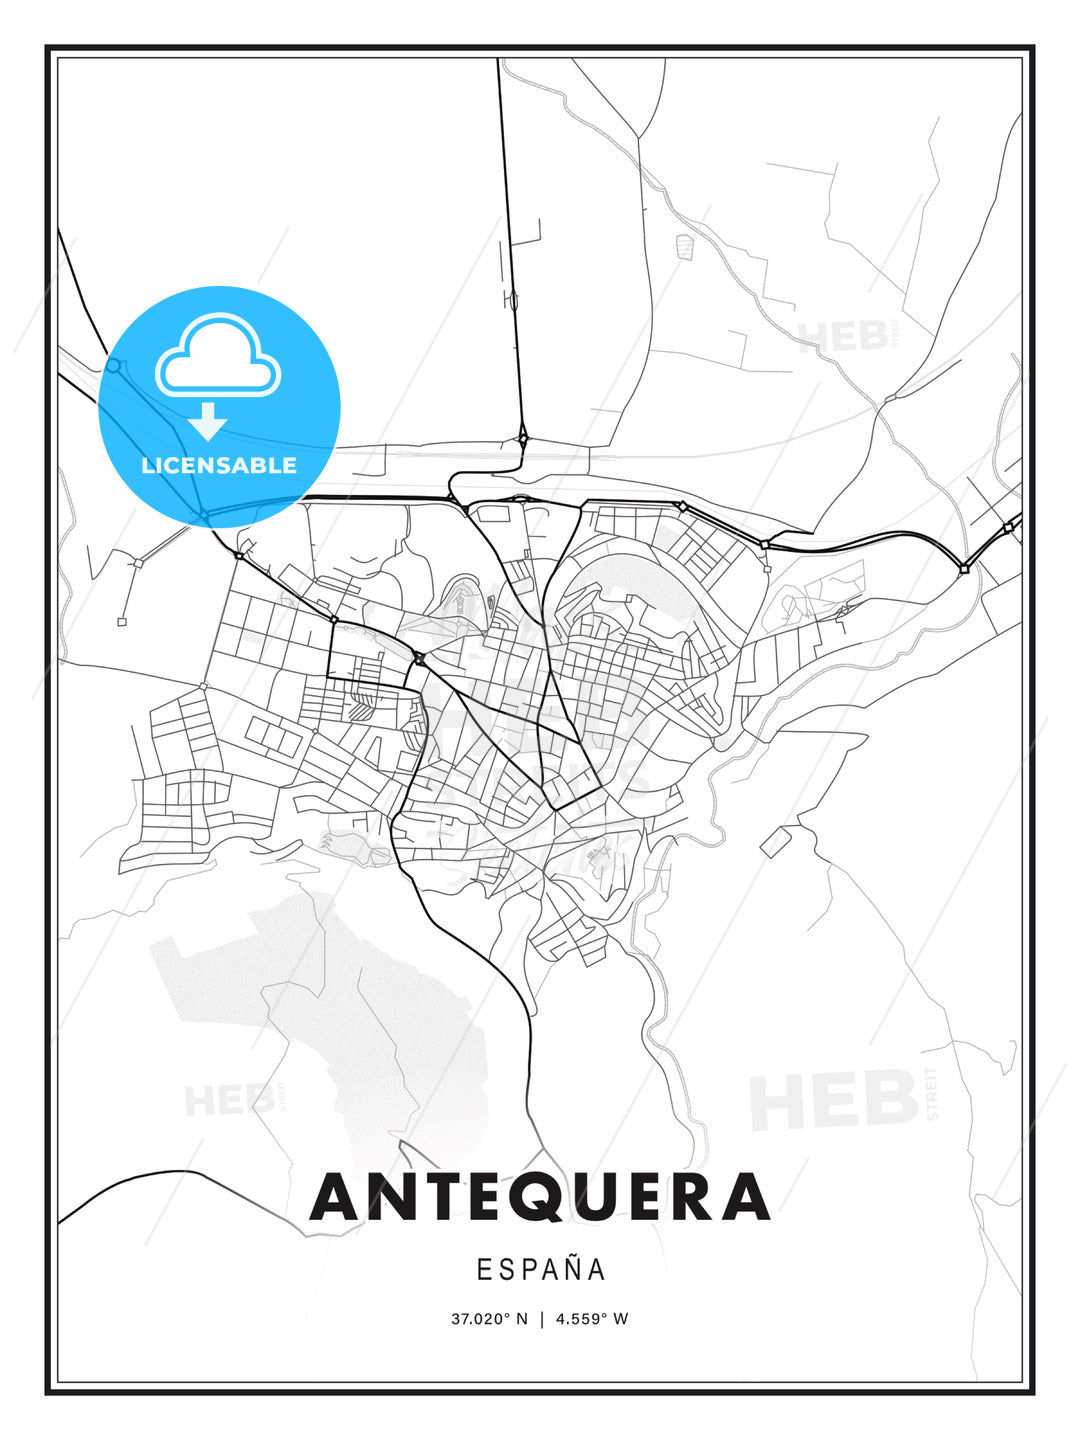 Antequera, Spain, Modern Print Template in Various Formats - HEBSTREITS Sketches